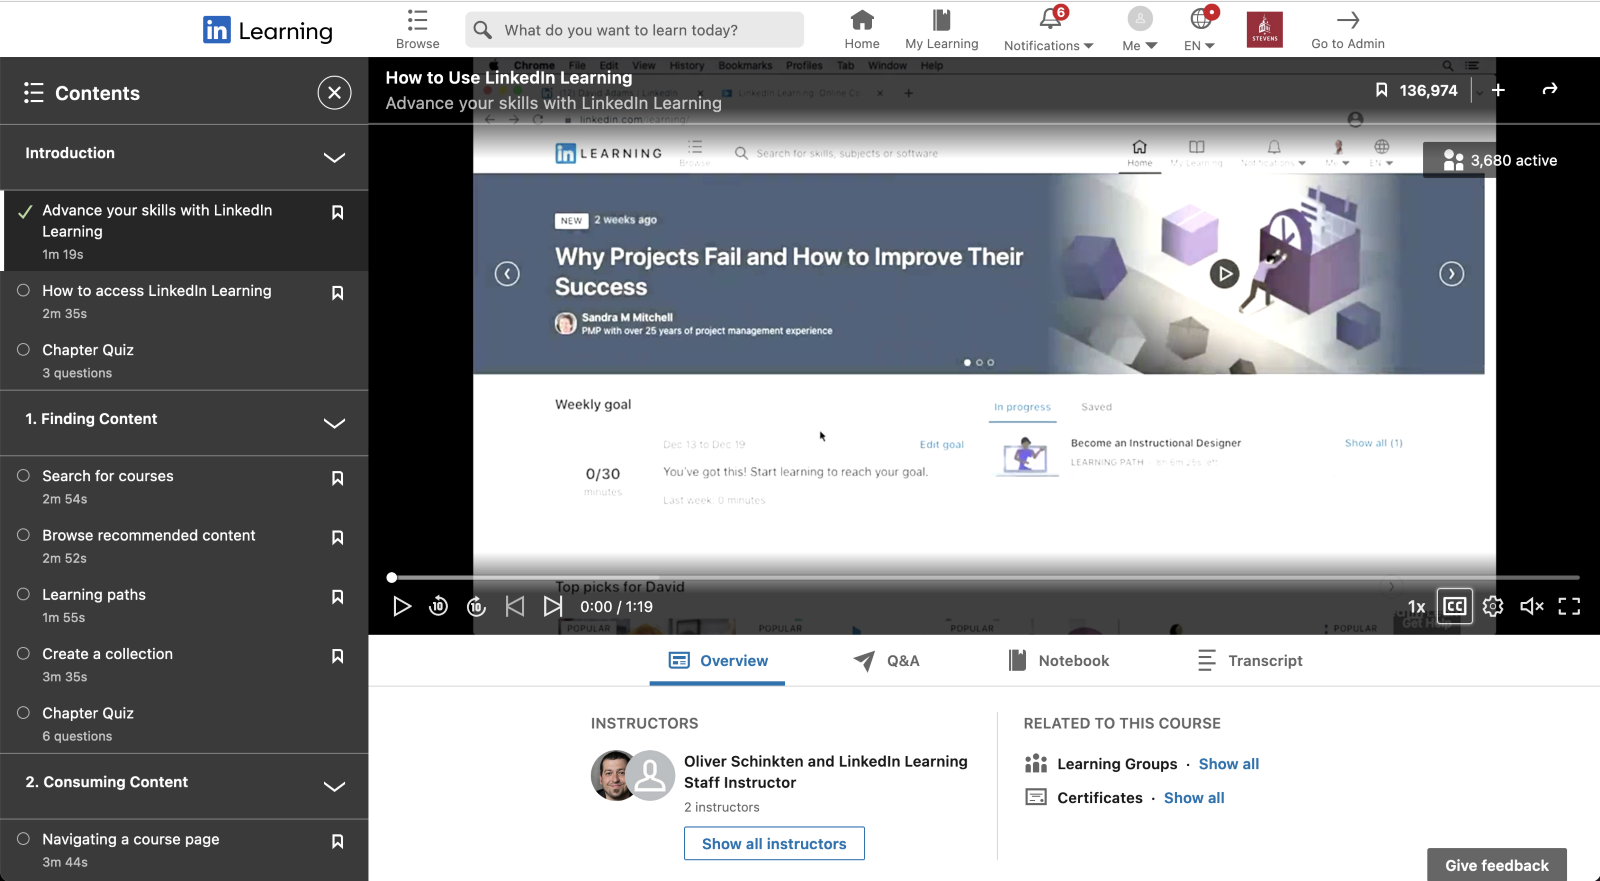 Screenshot of LinkedIn Learning video content page